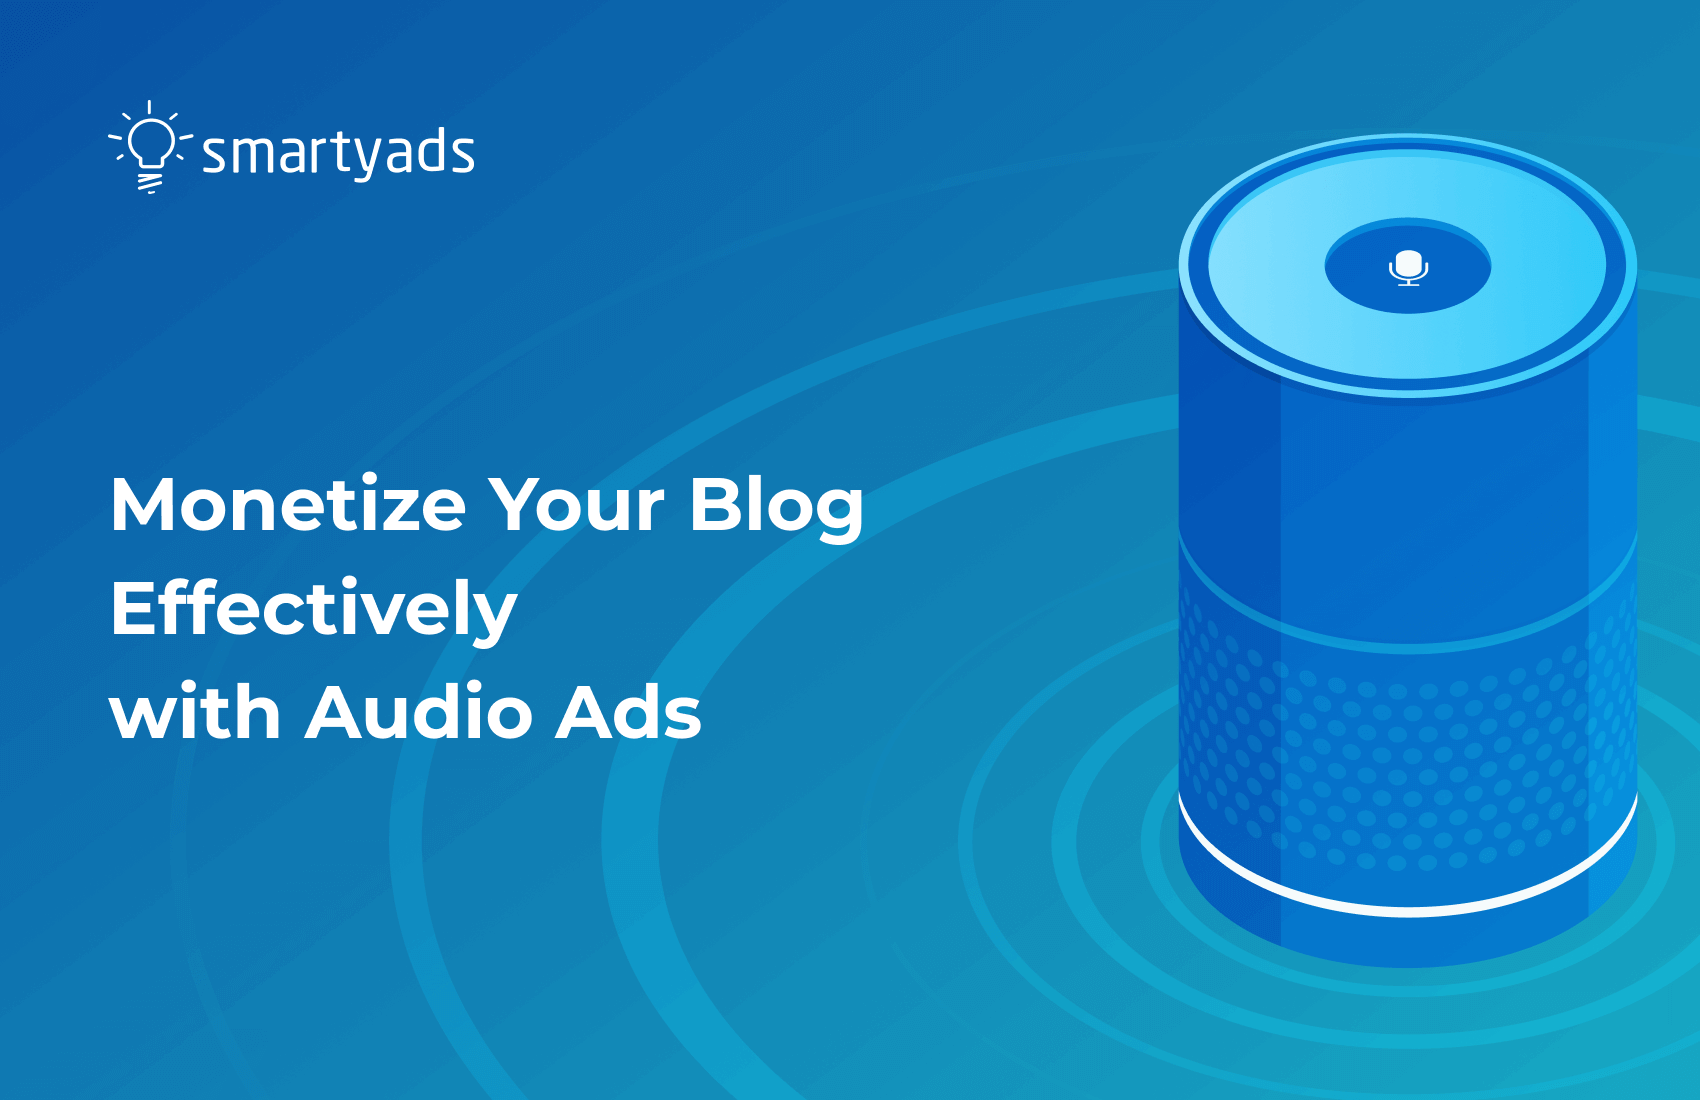 How to Monetize Your Blog with Audio Ads